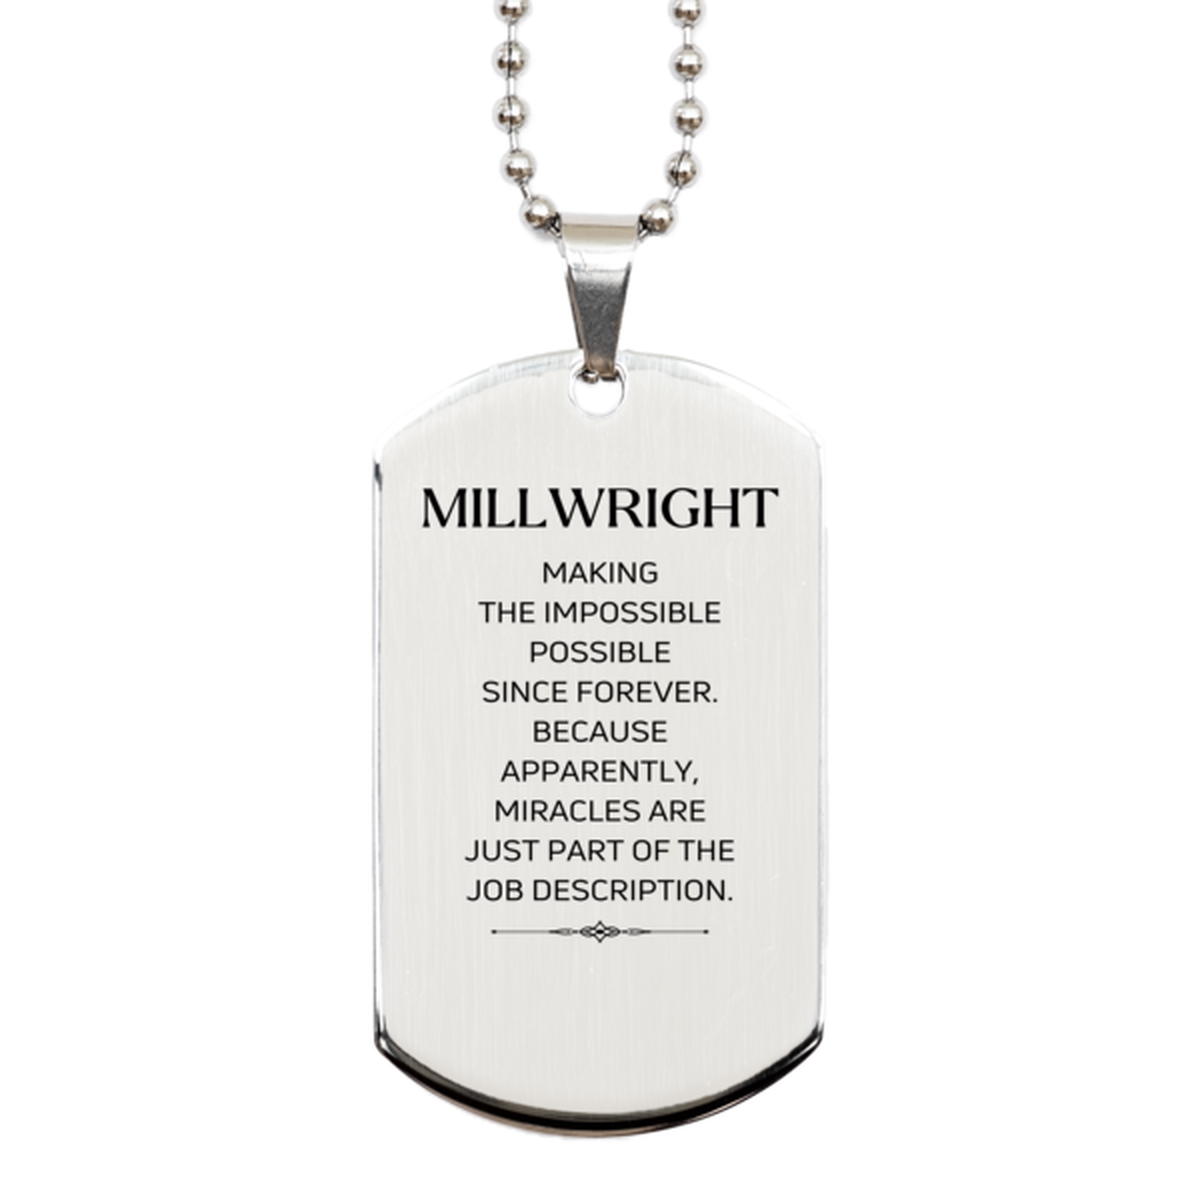 Funny Millwright Gifts, Miracles are just part of the job description, Inspirational Birthday Silver Dog Tag For Millwright, Men, Women, Coworkers, Friends, Boss